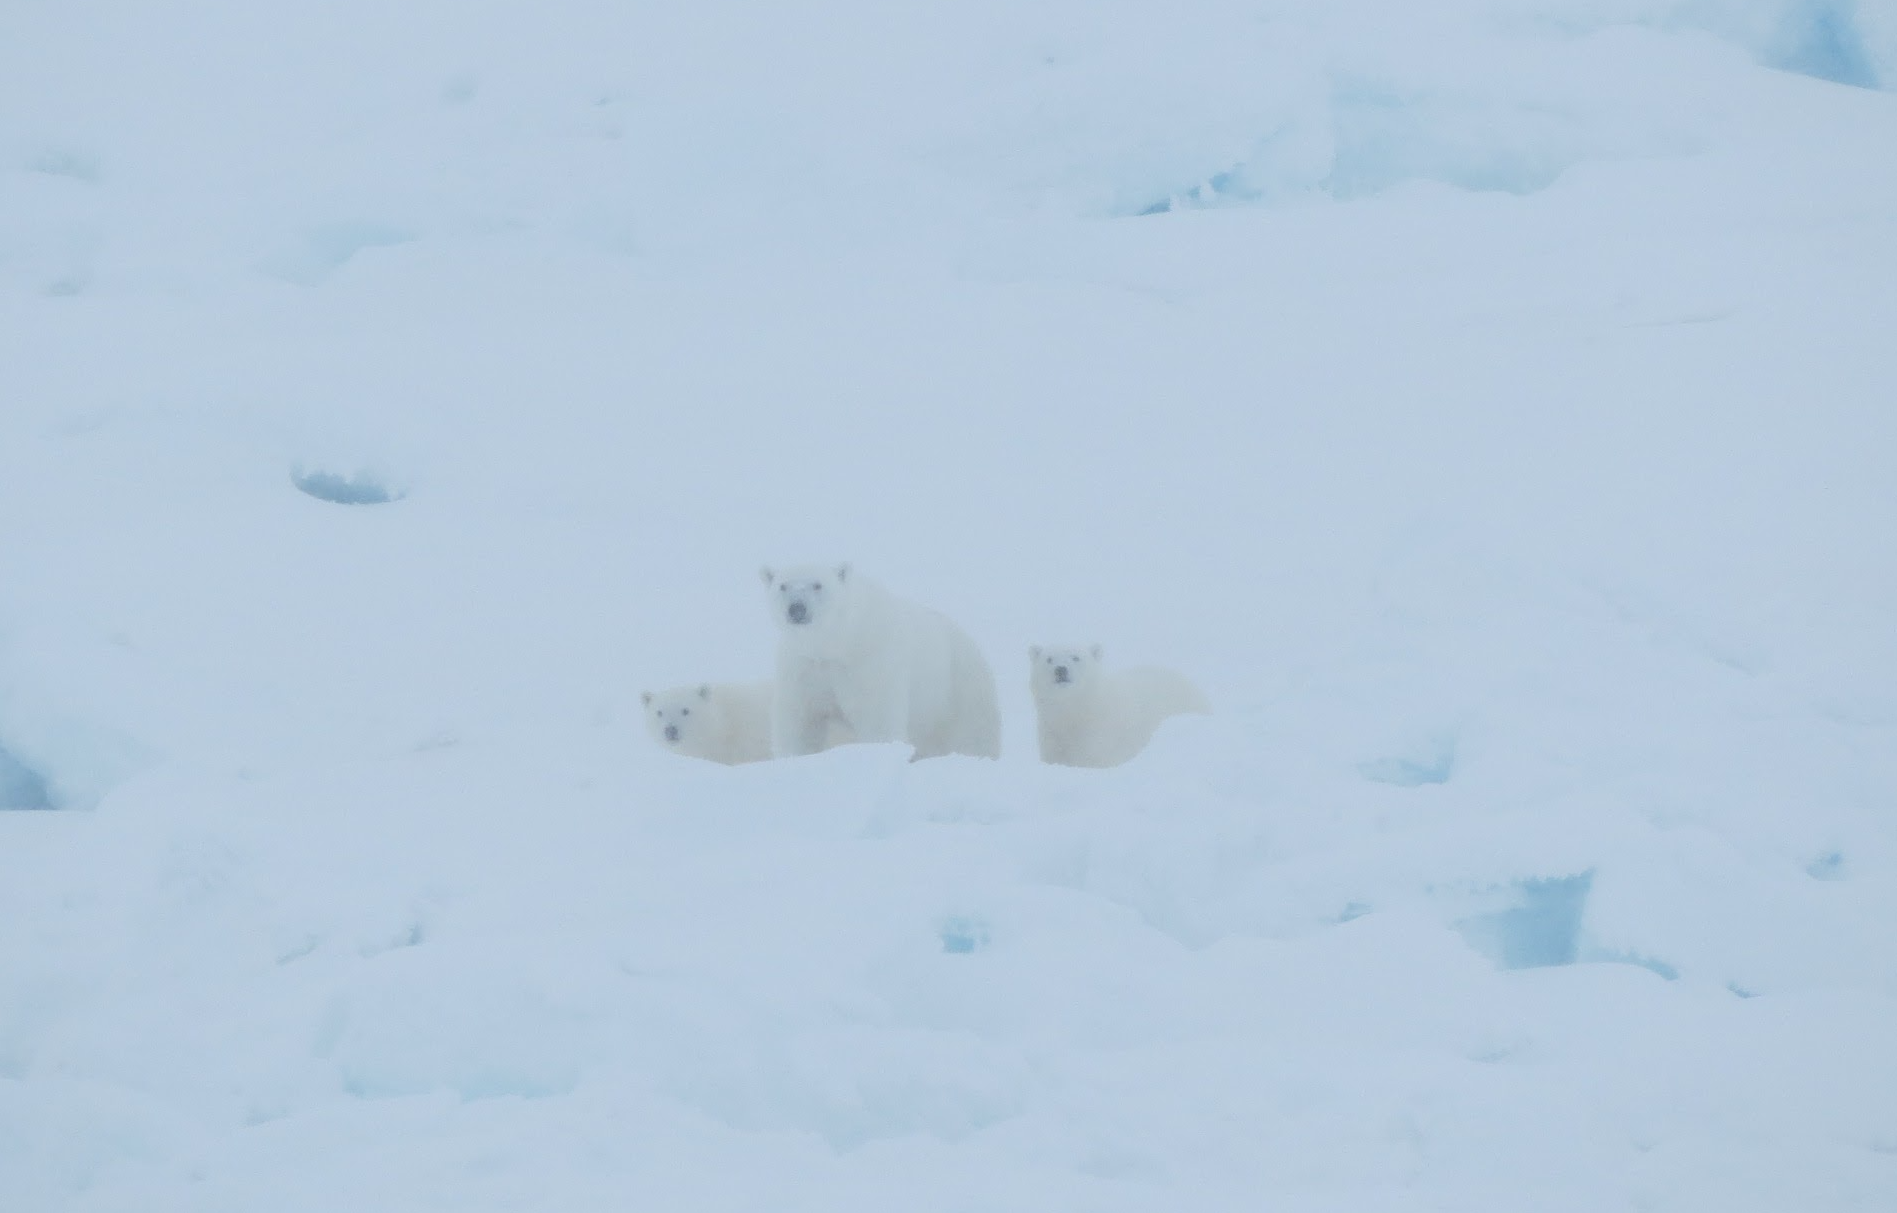 Polar bear with two young cubs in the snow